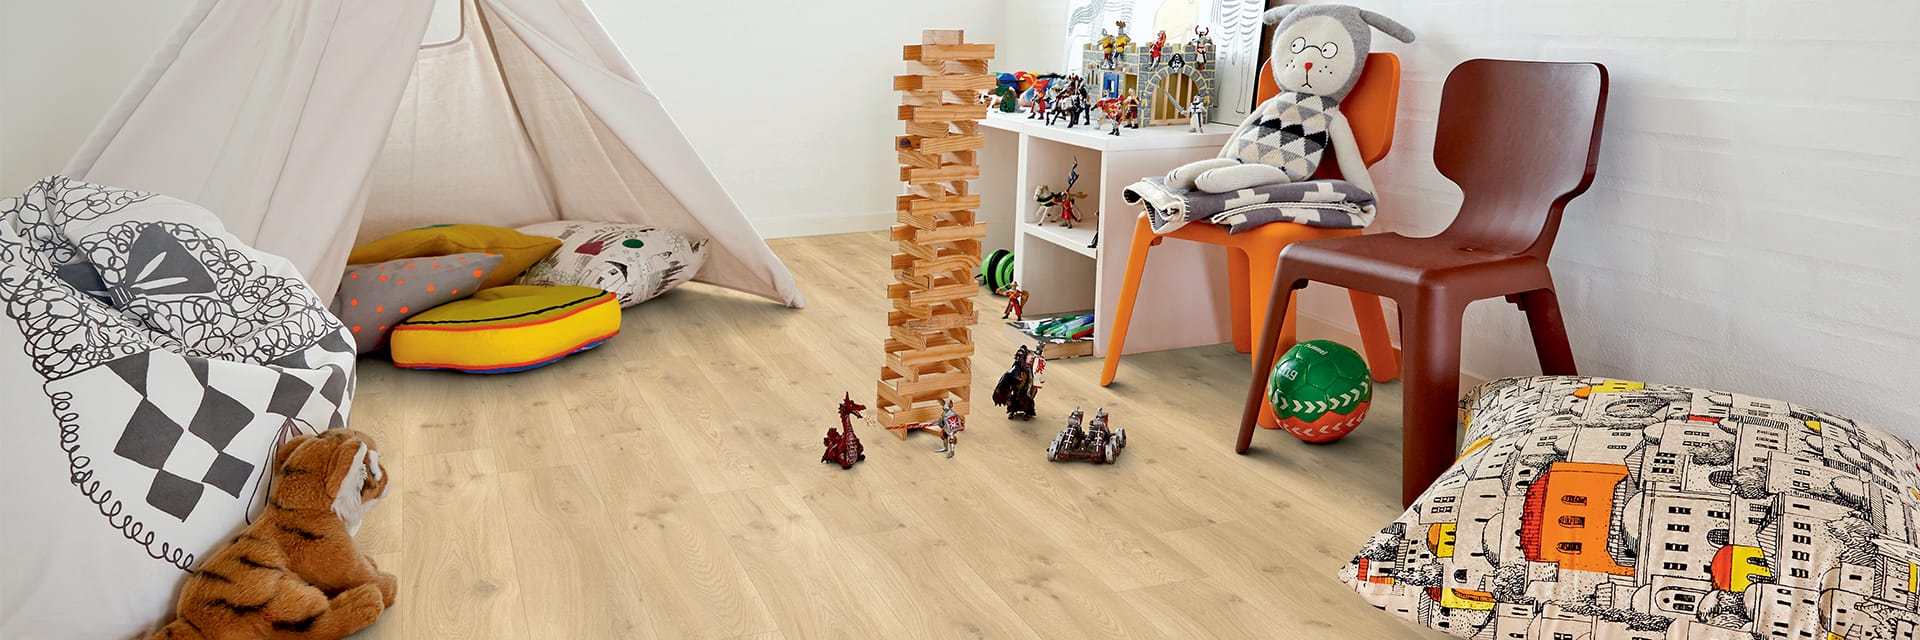 kids room with toys laying on a beige vinyl floor